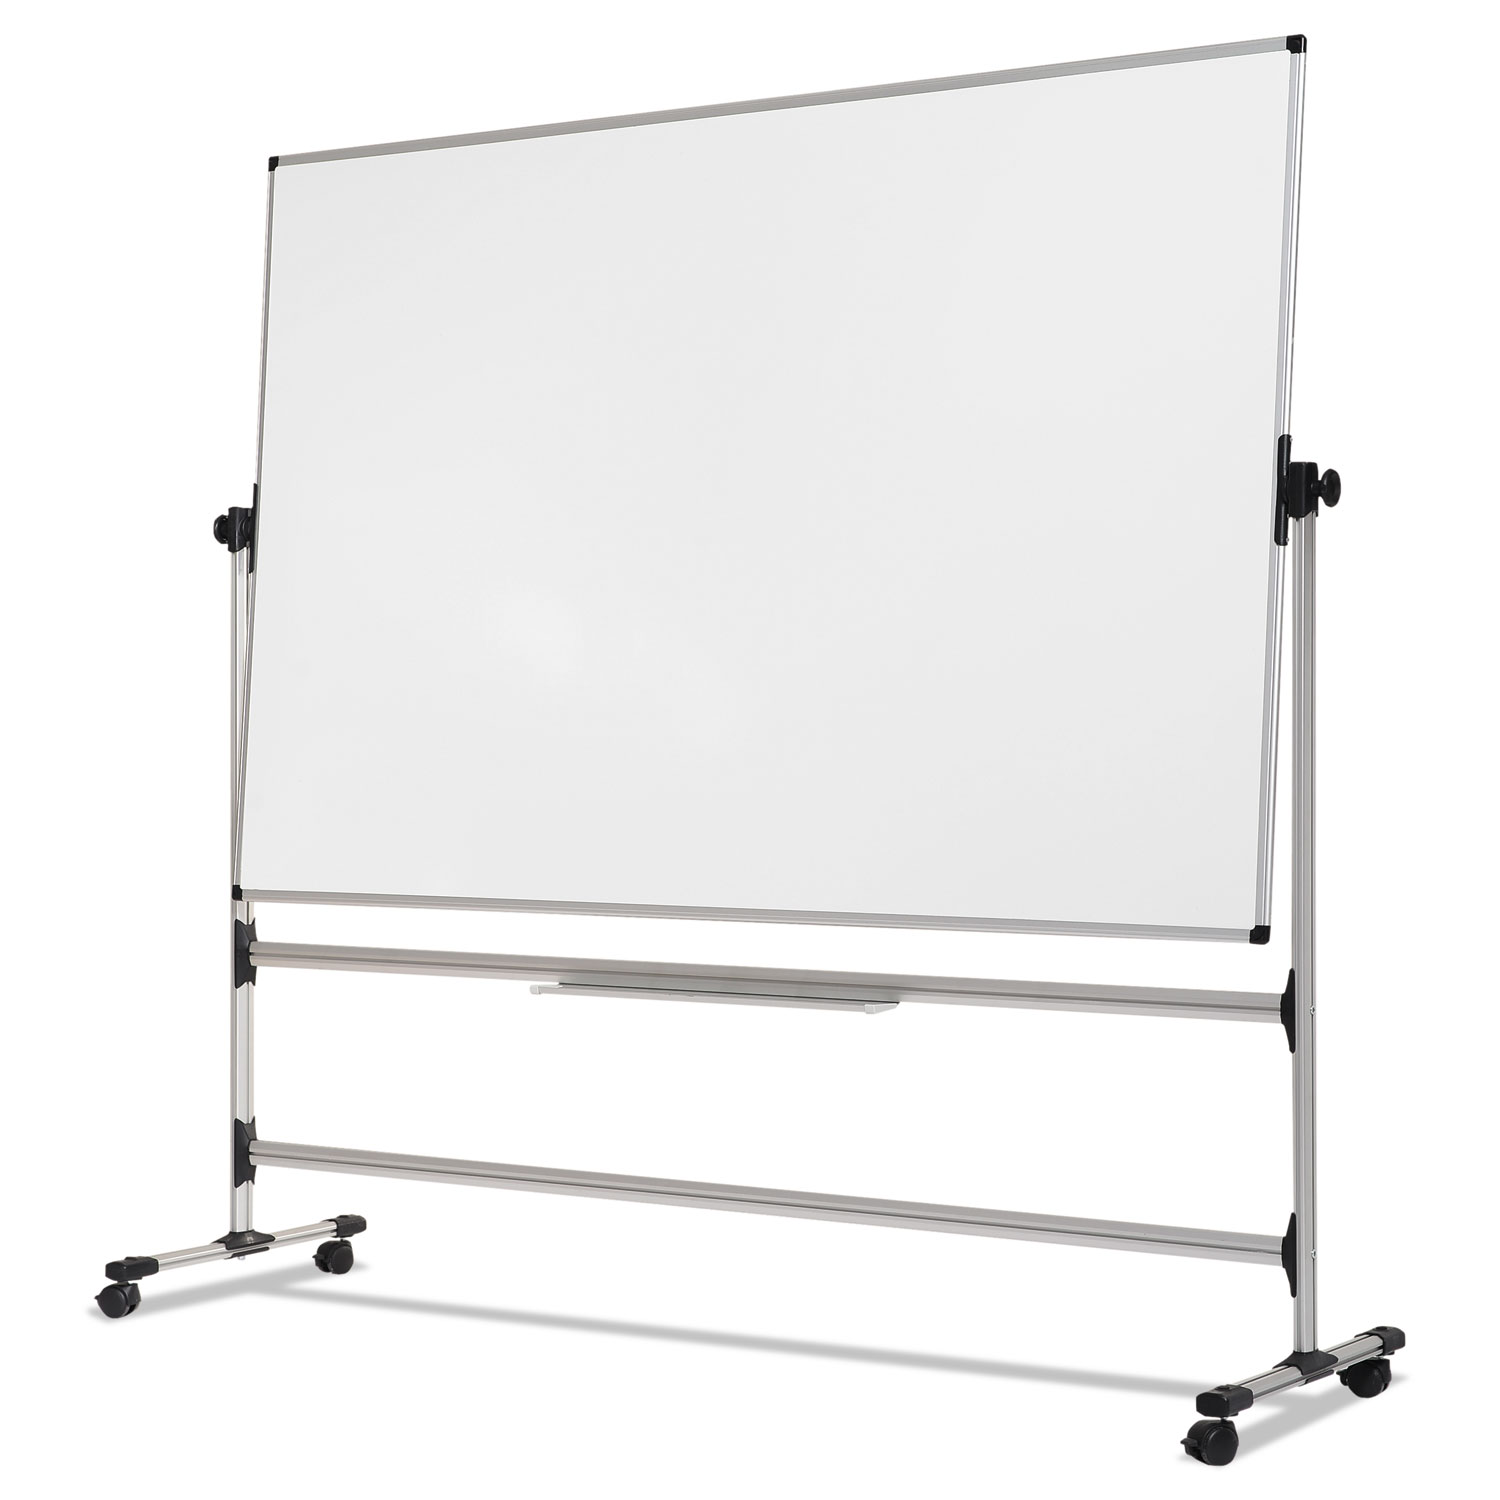  MasterVision RQR0221 Earth Silver Easy Clean Revolver Dry Erase Board, 36 x 48, White, Steel Frame (BVCRQR0221) 